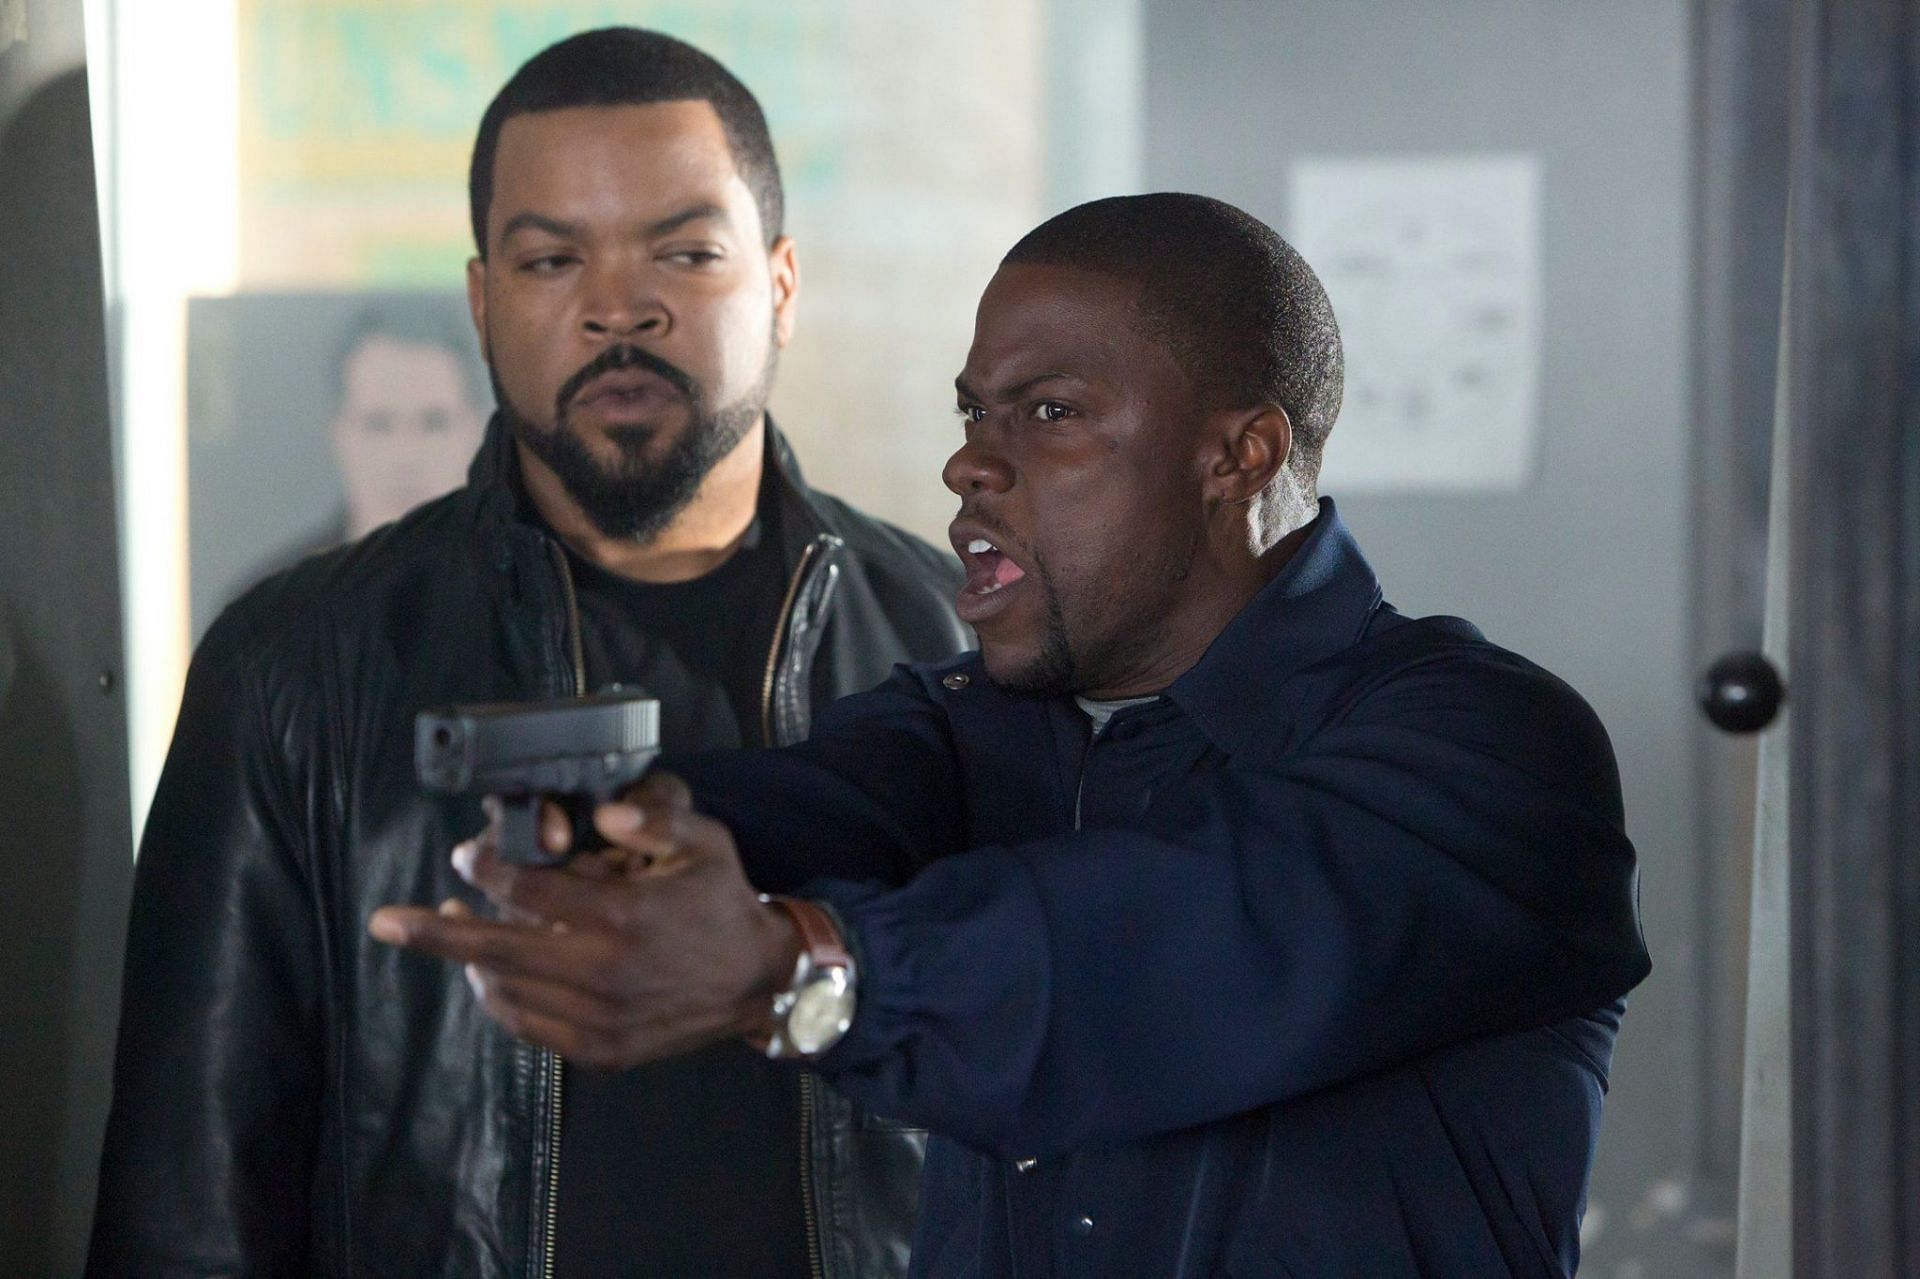 Kevin Hart and Ice Cube (Image via Facebook/Ride Along)